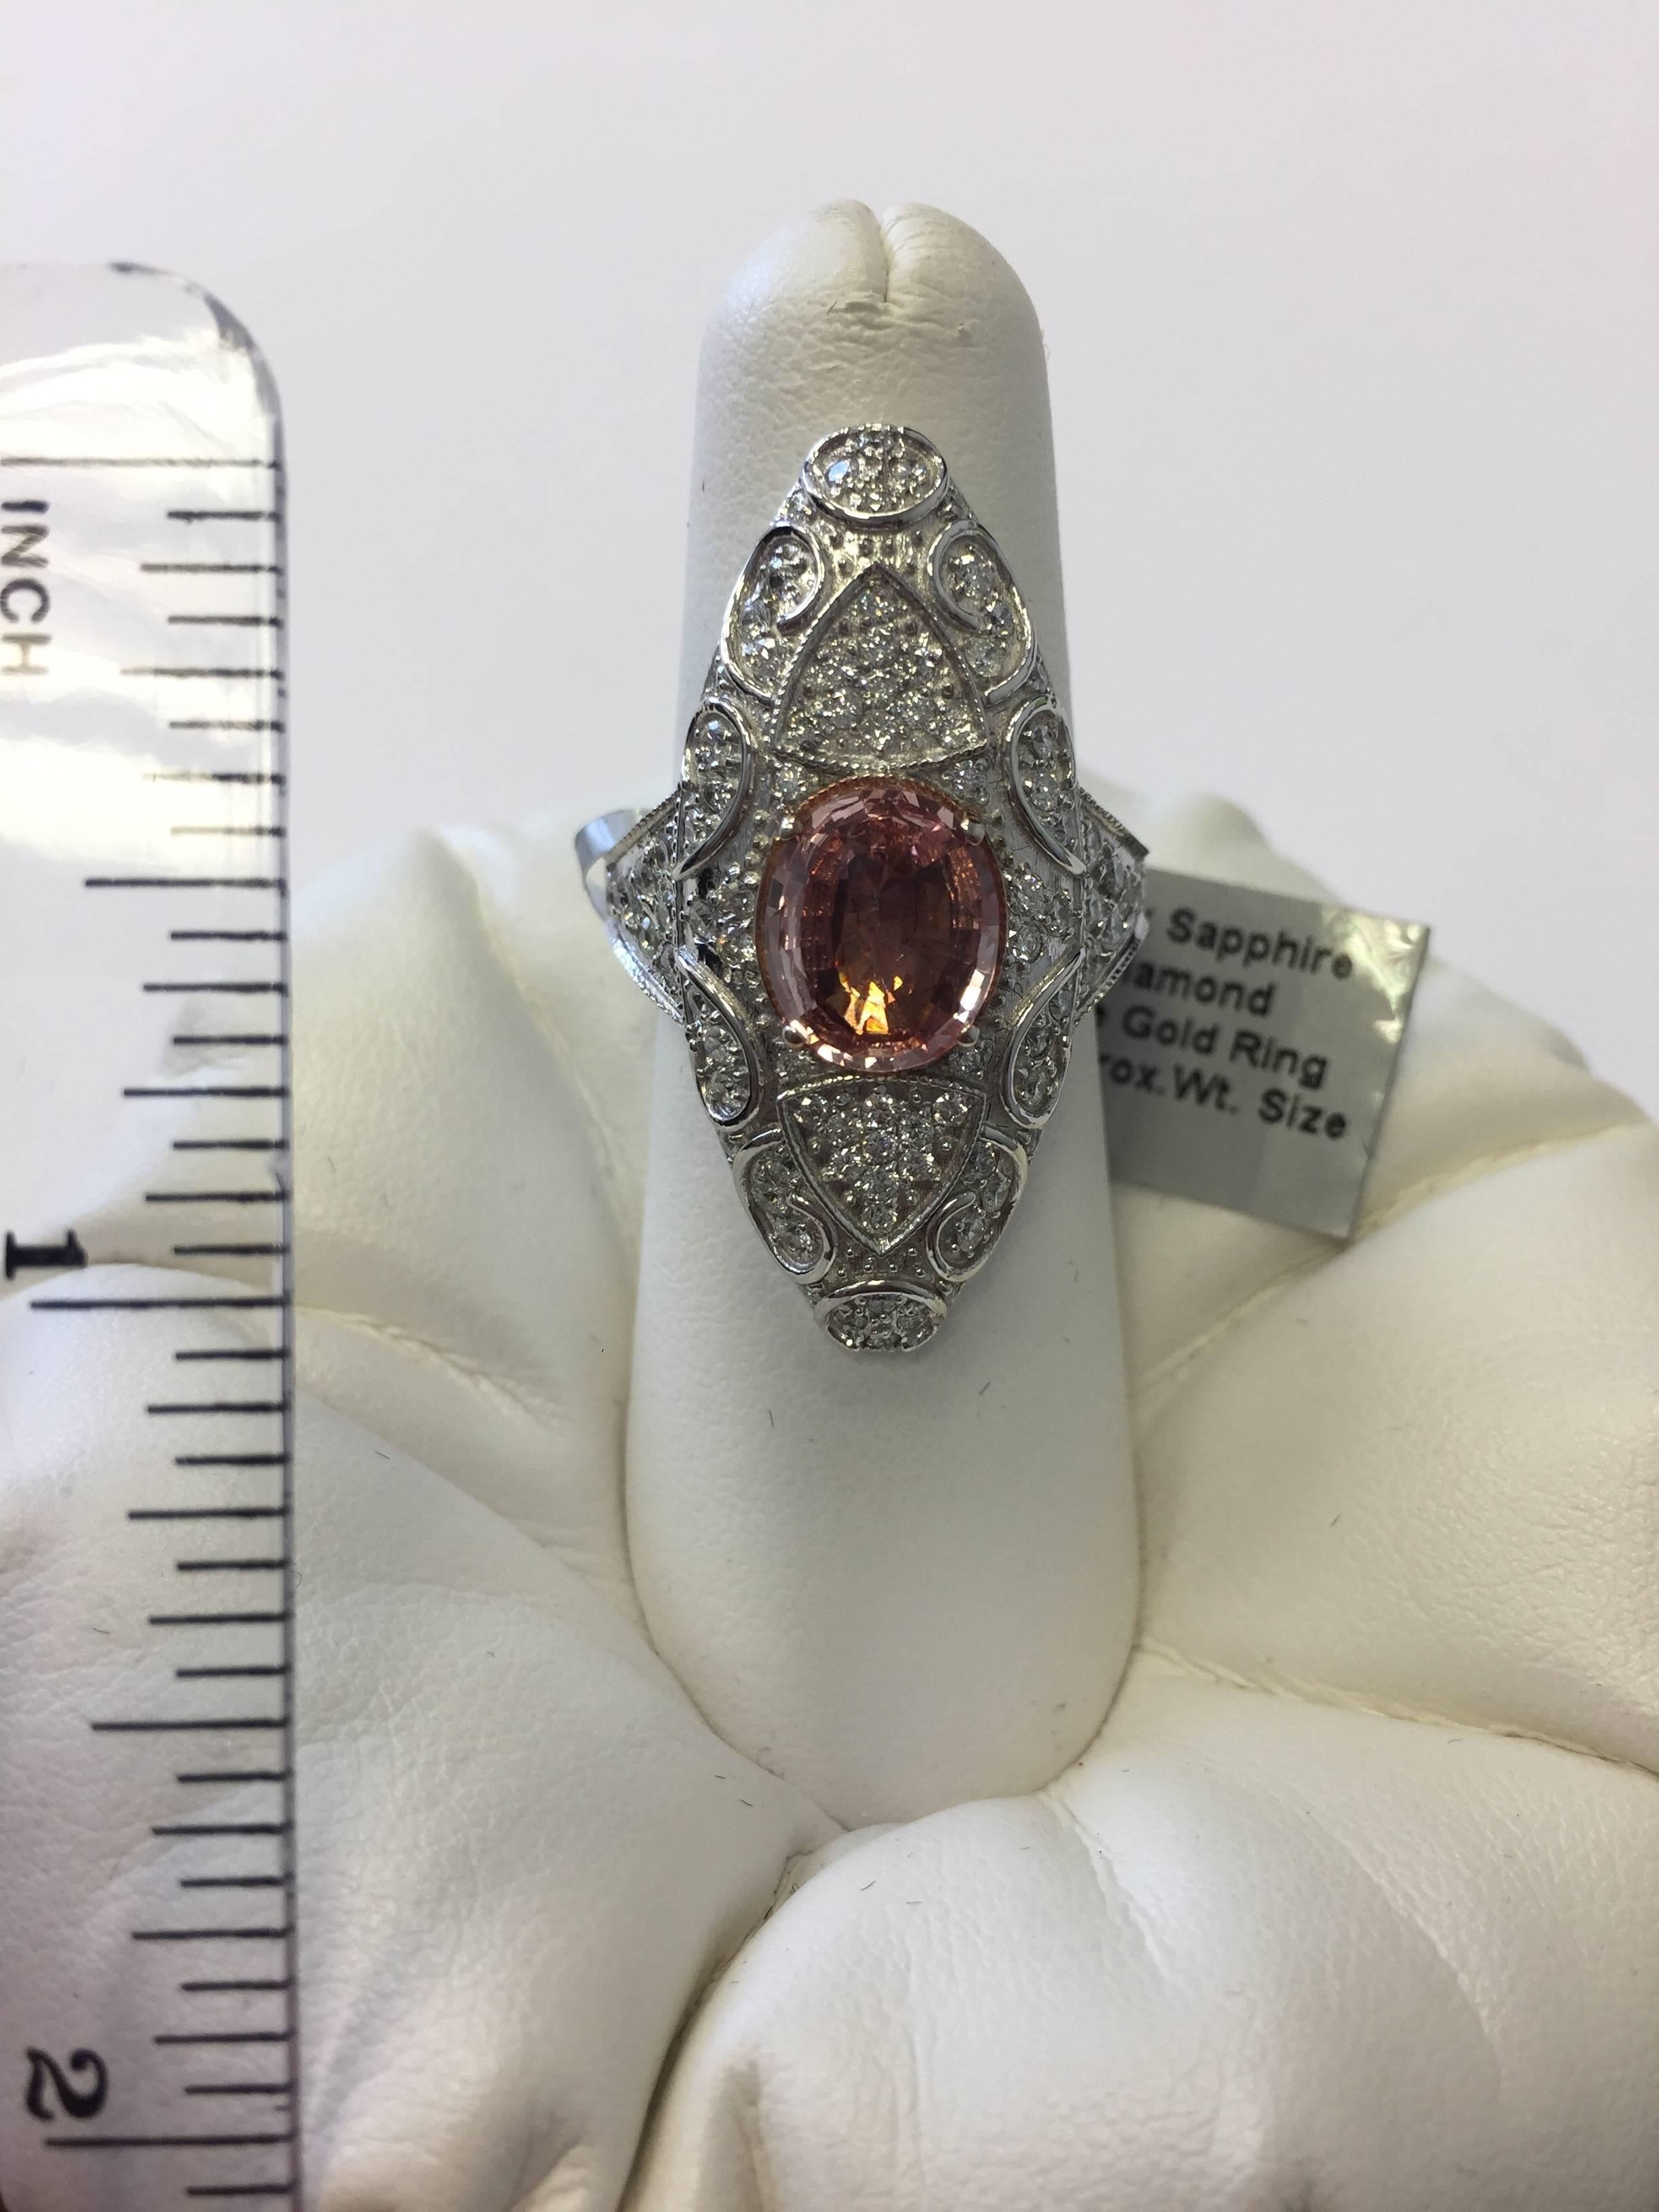 Stunning 2.32 ct pink sapphire oval with 1.25 ct white diamond rounds in 18k white gold in this estate inspired look.  Size 5.5